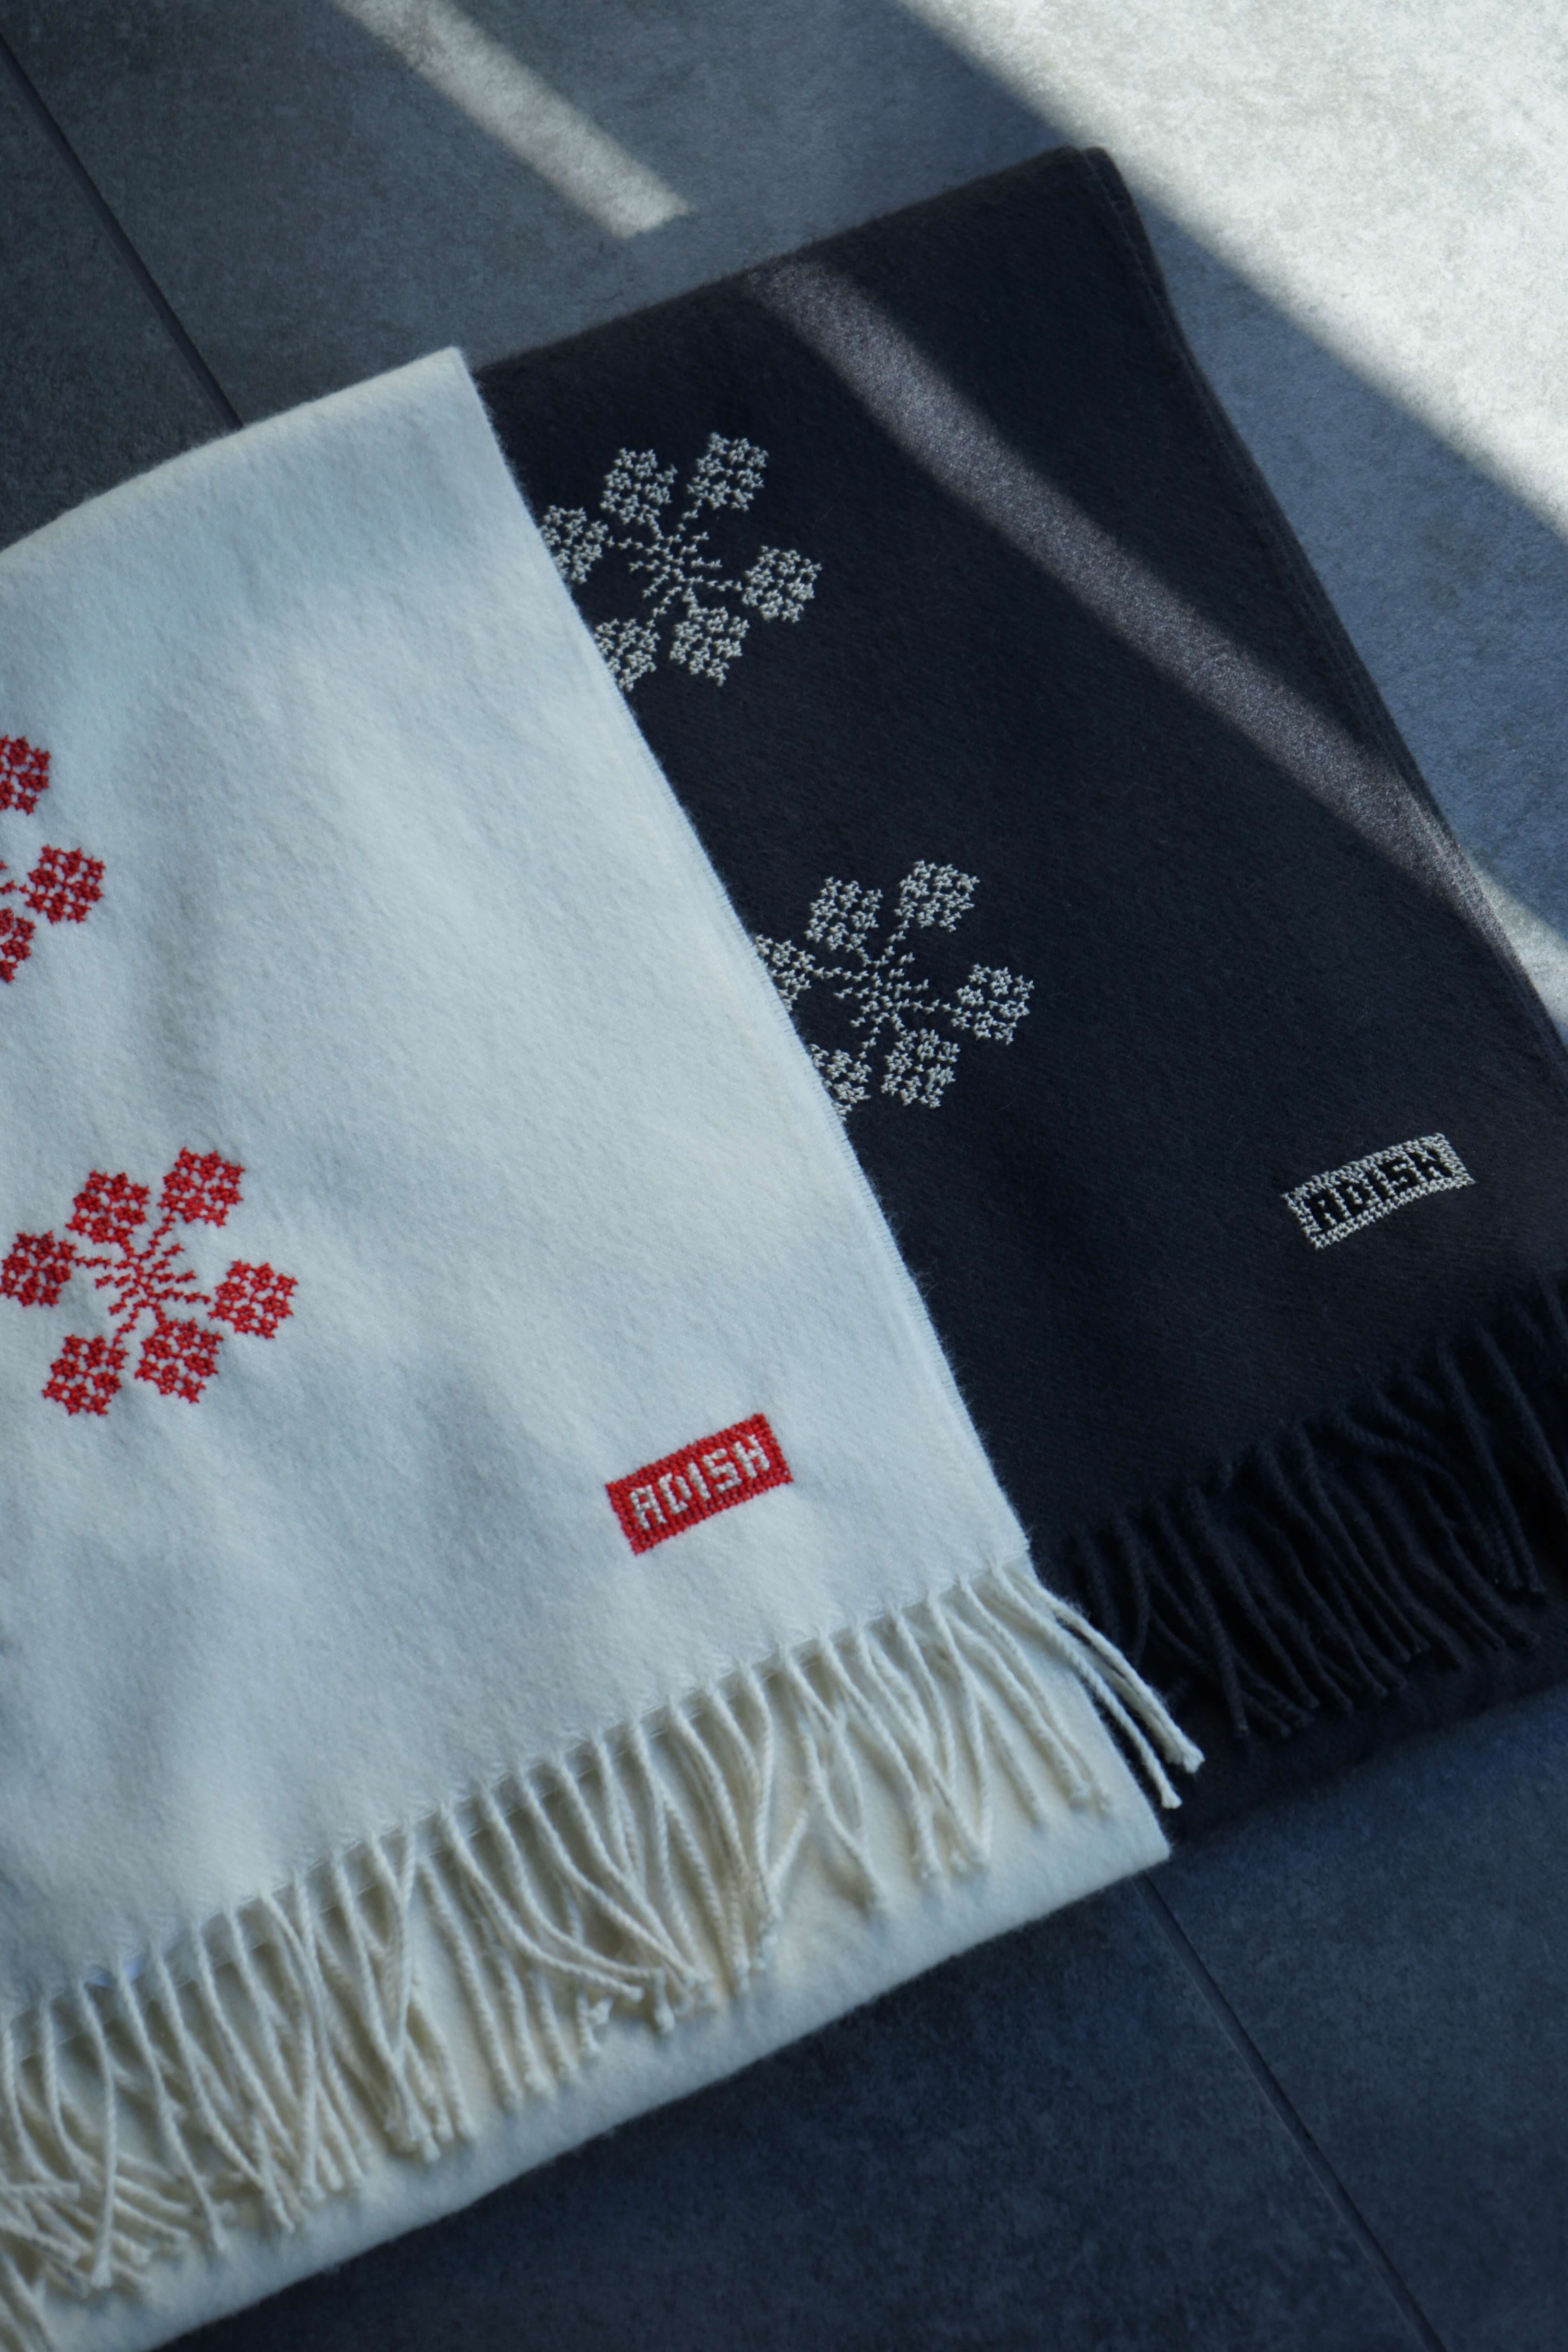 THE INOUE BROTHERS UP-CYCLED ALPACA SCARF - GREY